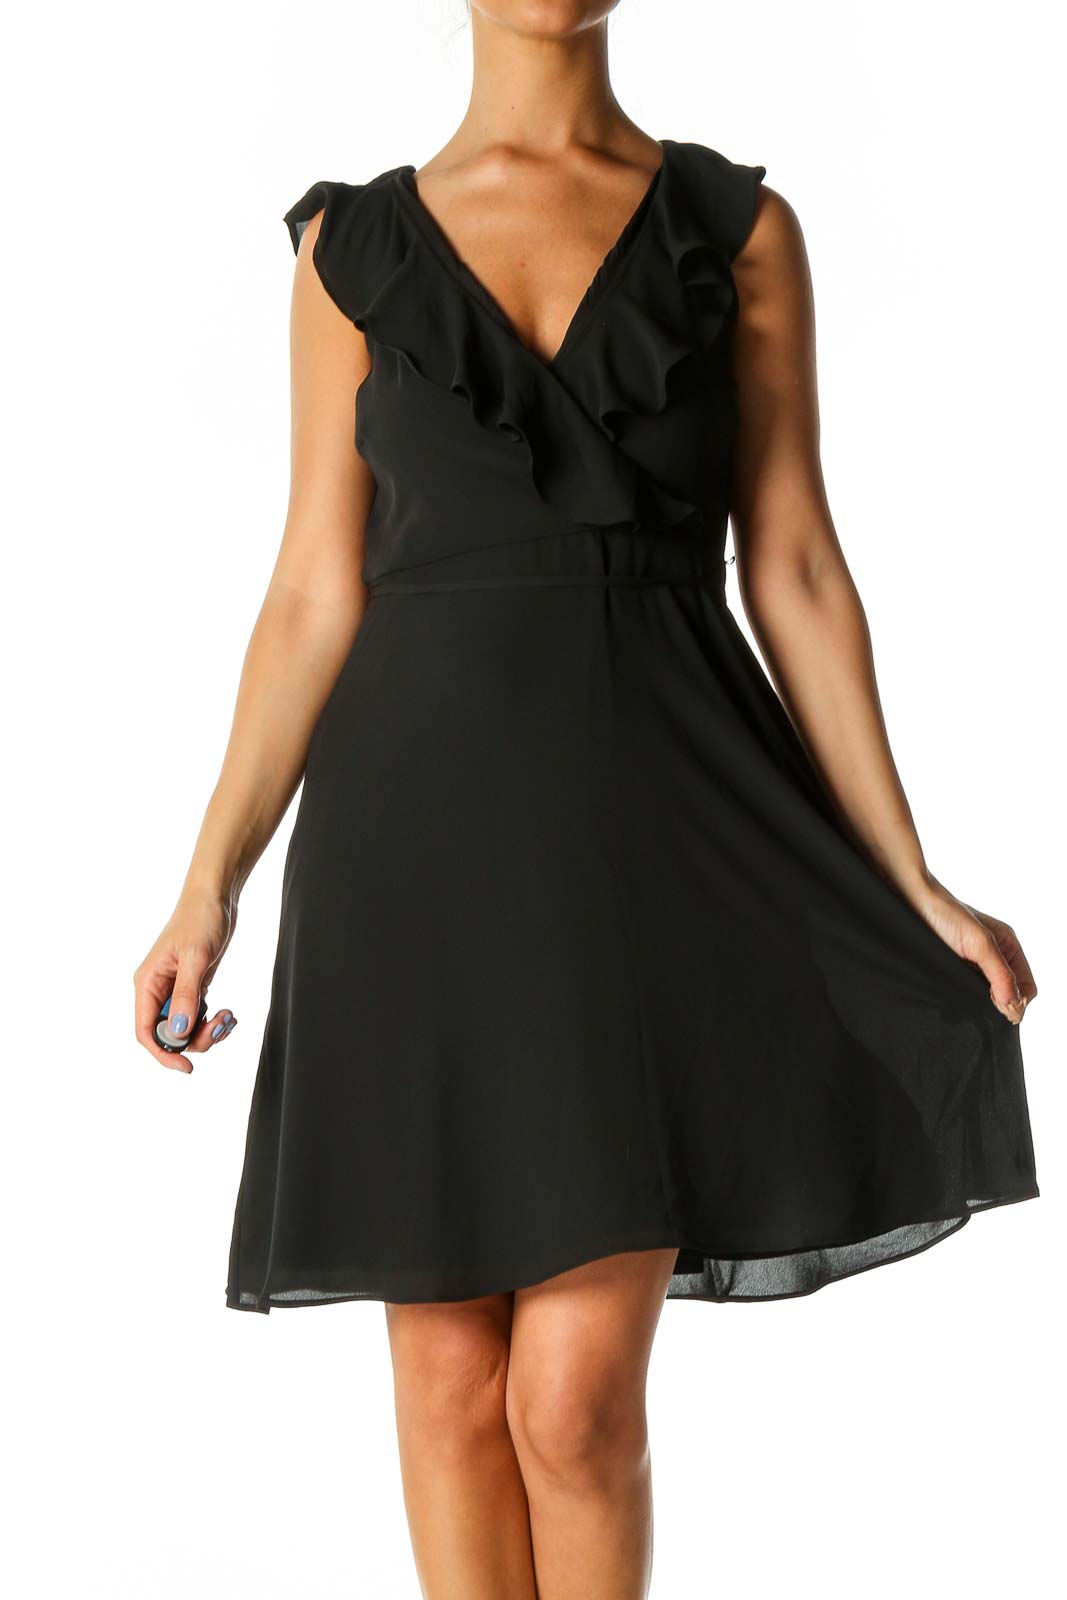 Black Solid Casual Fit & Flare Dress Front